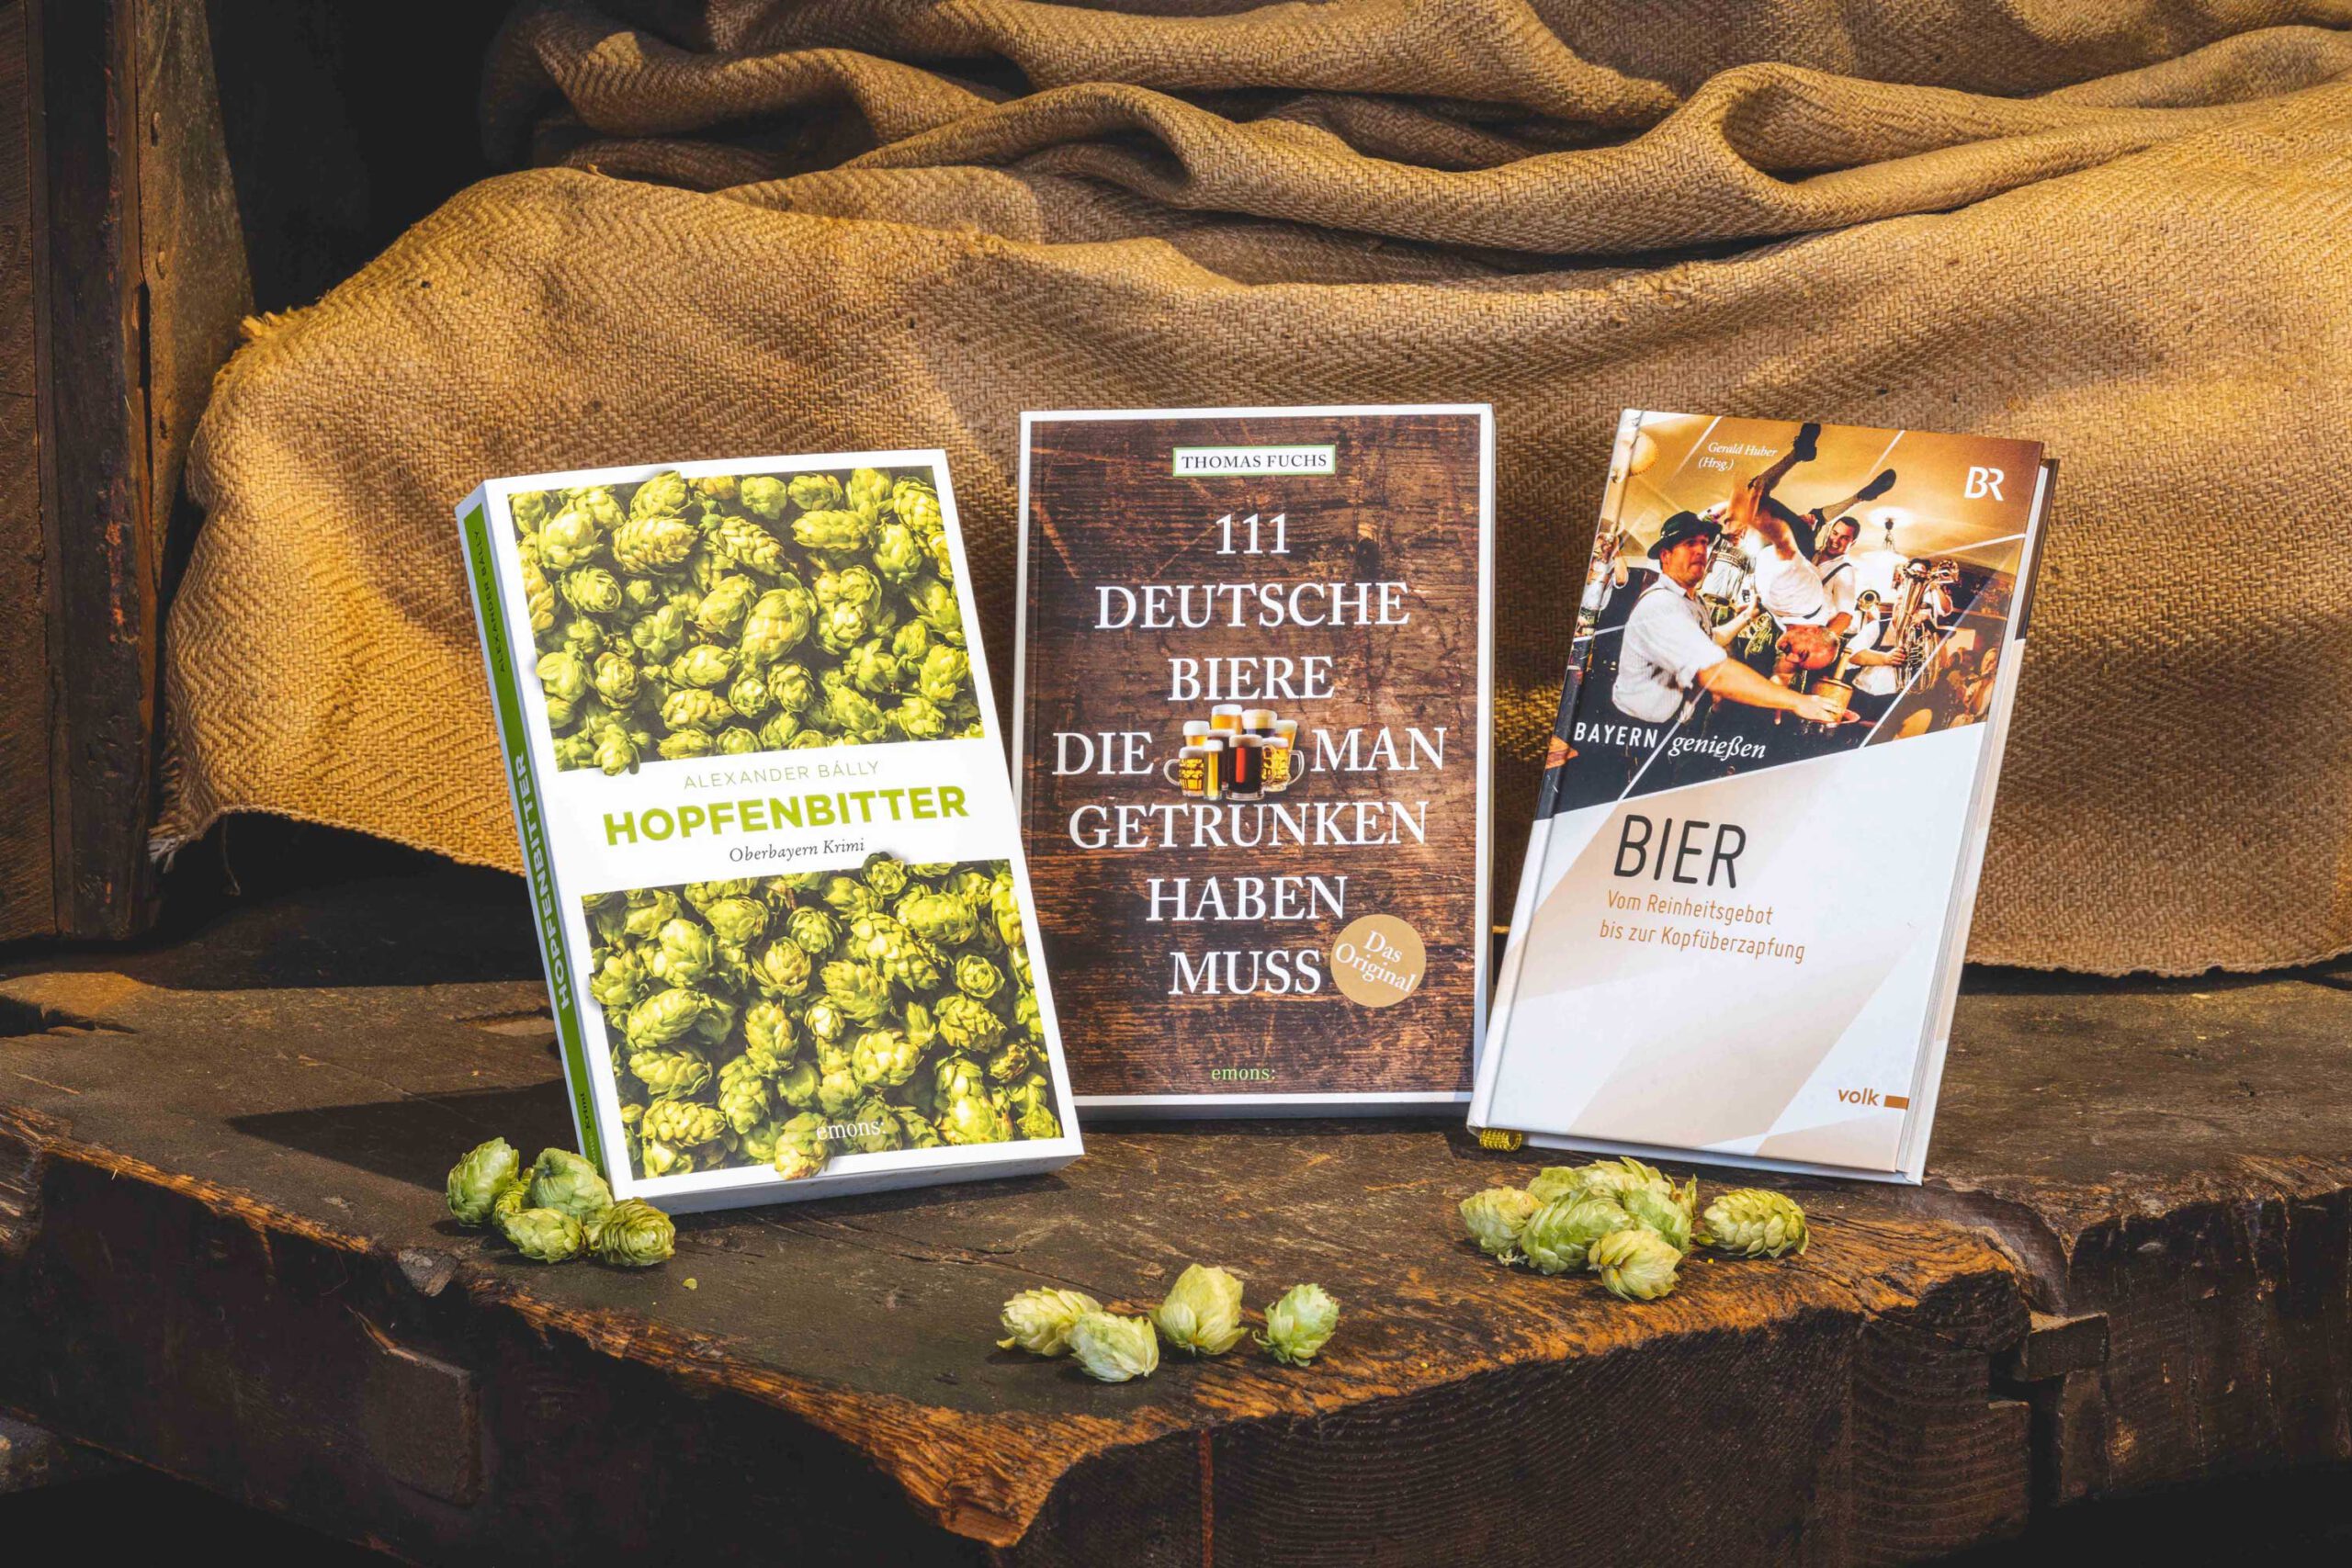 Publications about hops and beer